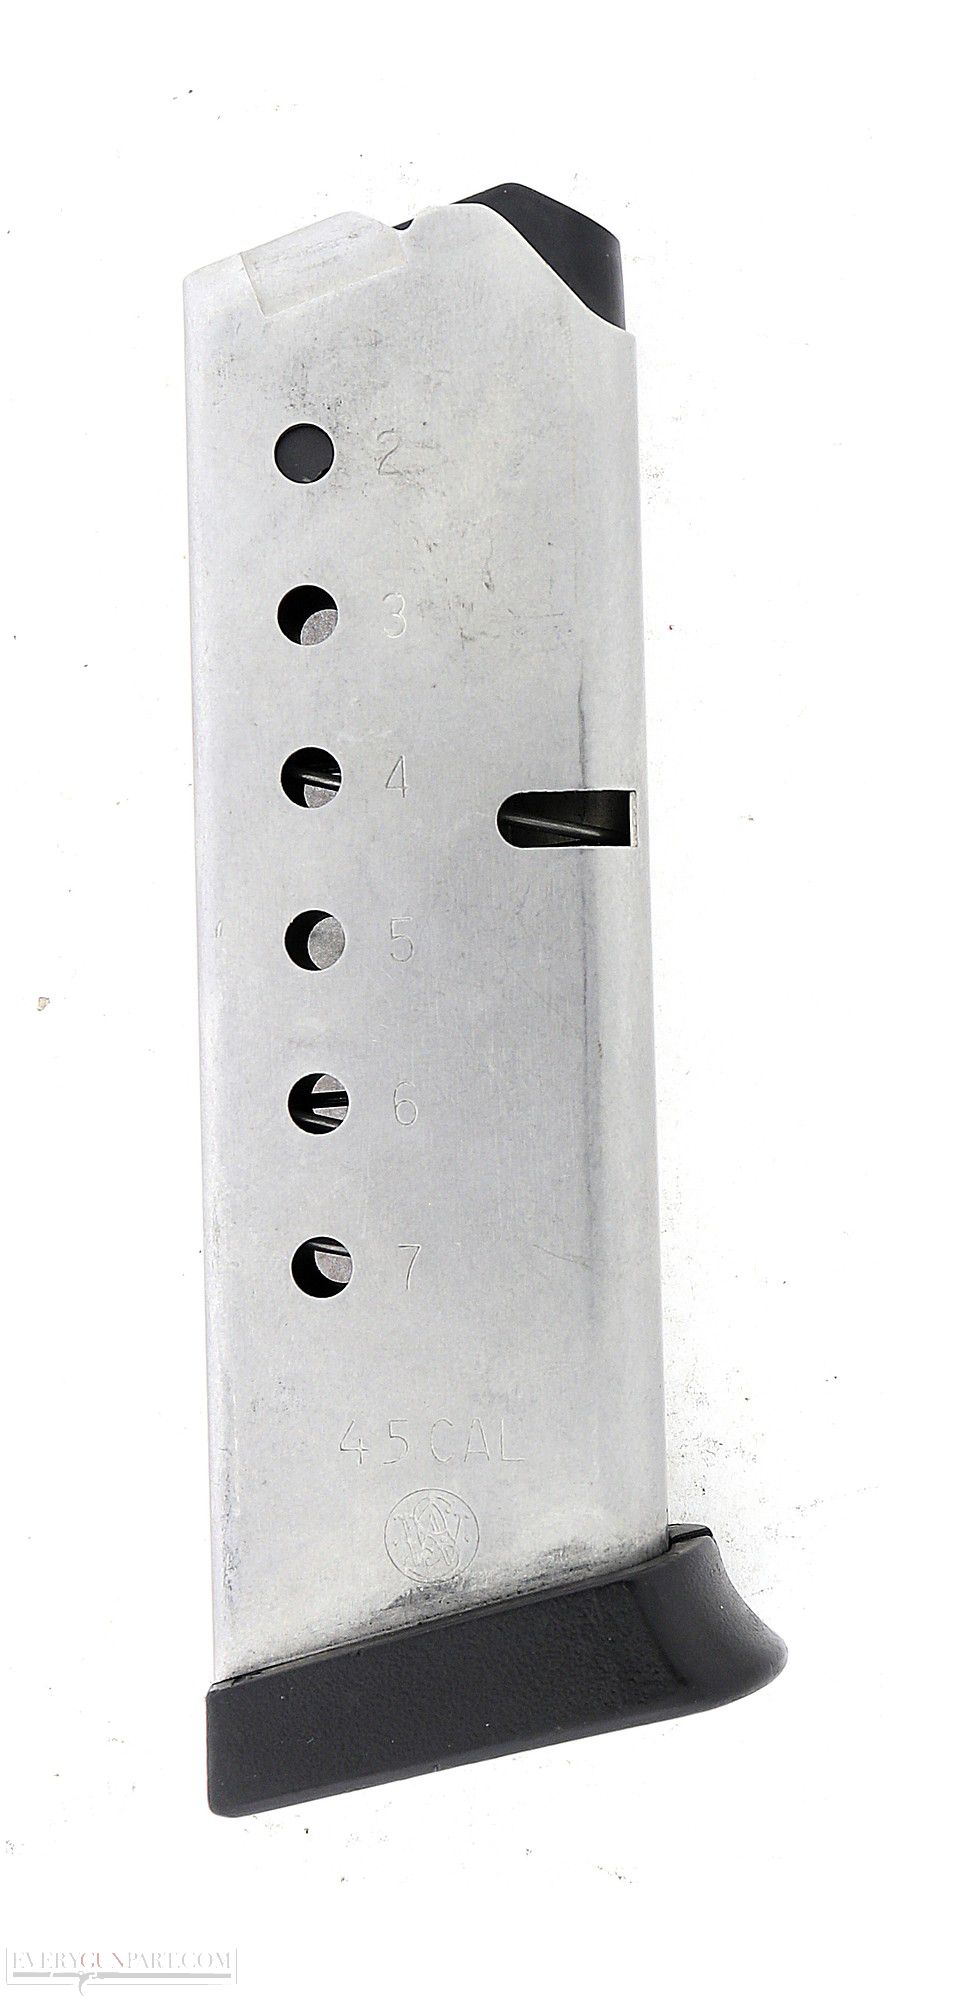 Details about   Smith & Wesson 4516 457 45acp 7 Round Blued Steel Magazine w/ Finger Rest Mag 